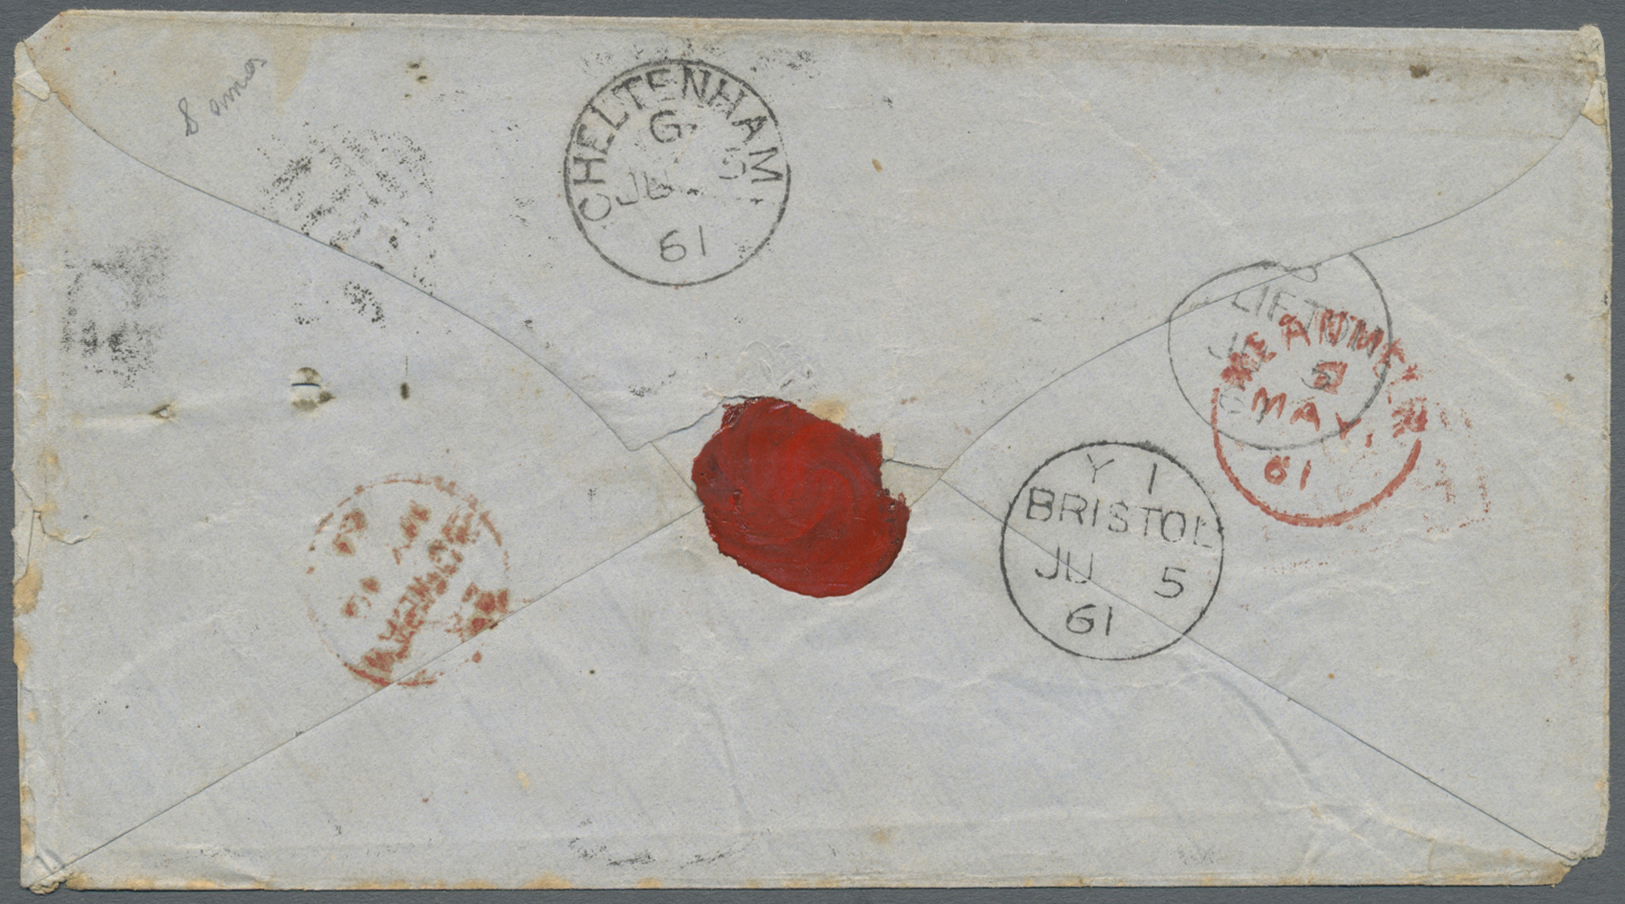 Br Indien: 1861. Envelope (small Faults) Addressed To England Bearing SG 36, 8a Carmine On Blue Glazed Paper Tied By '16 - Other & Unclassified